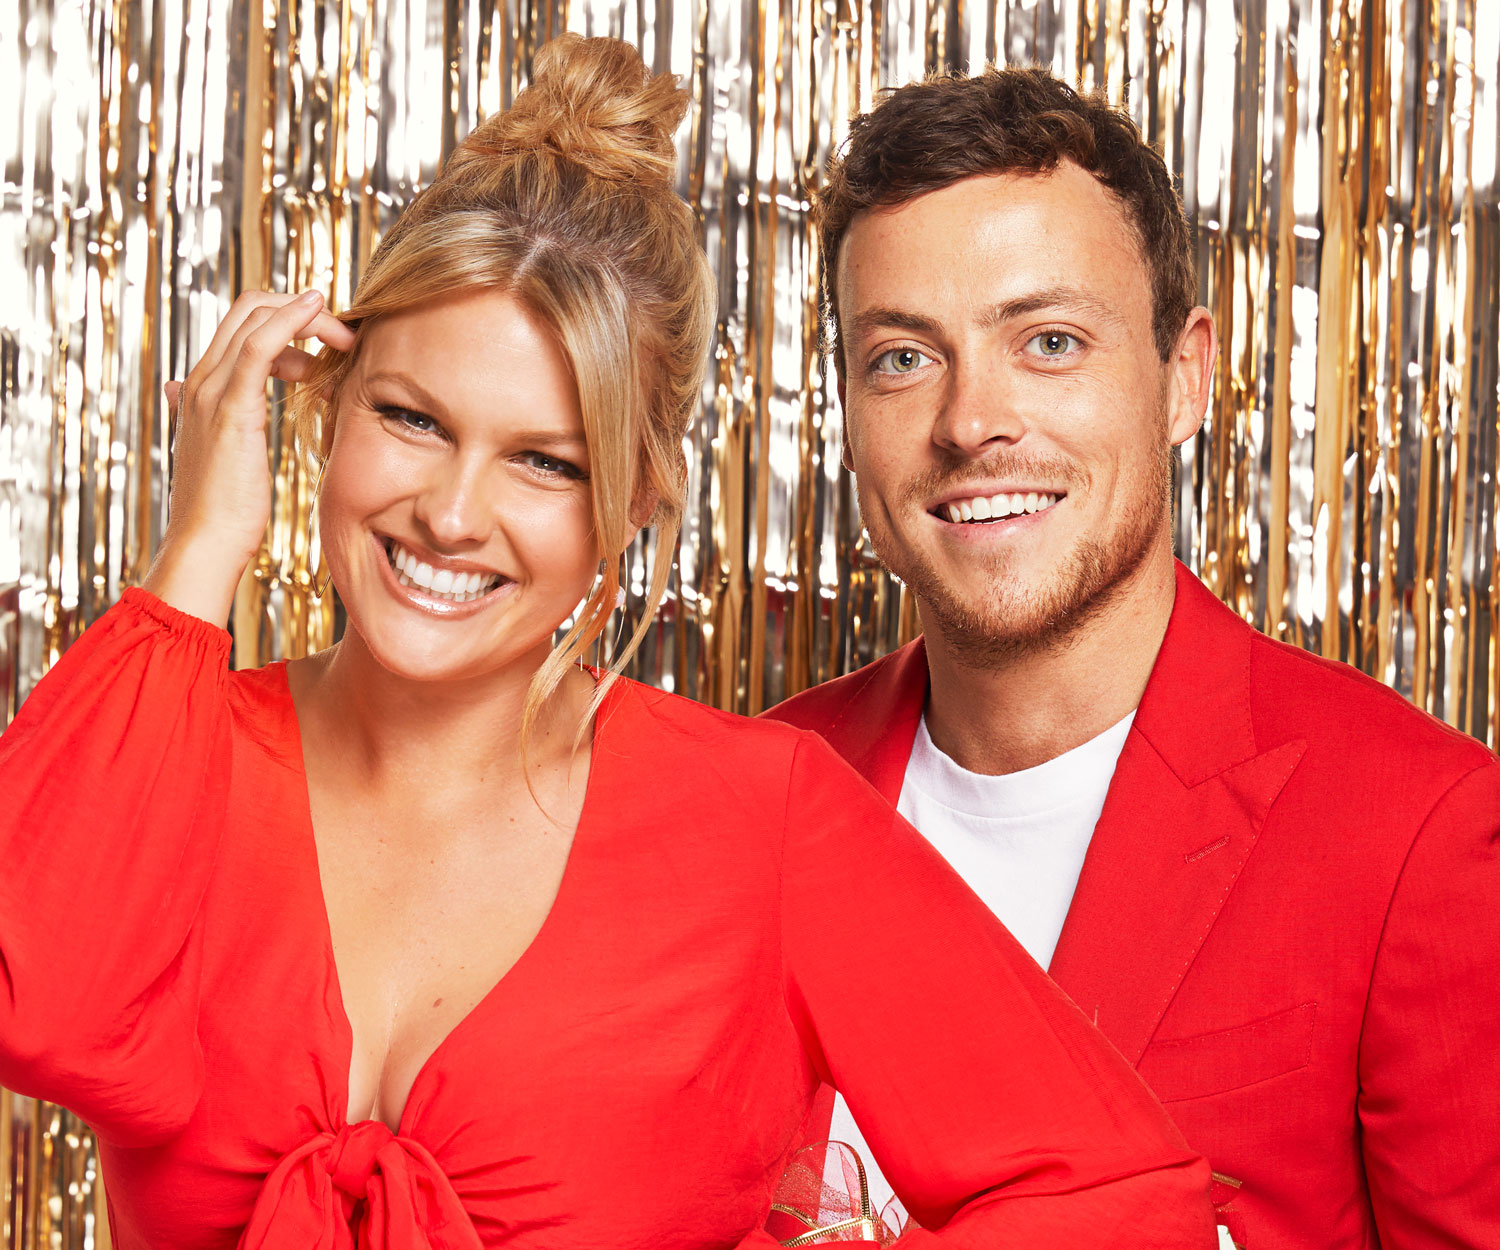 Home and Away’s Sophie Dillman and Patrick O’Connor share their big plans for Christmas